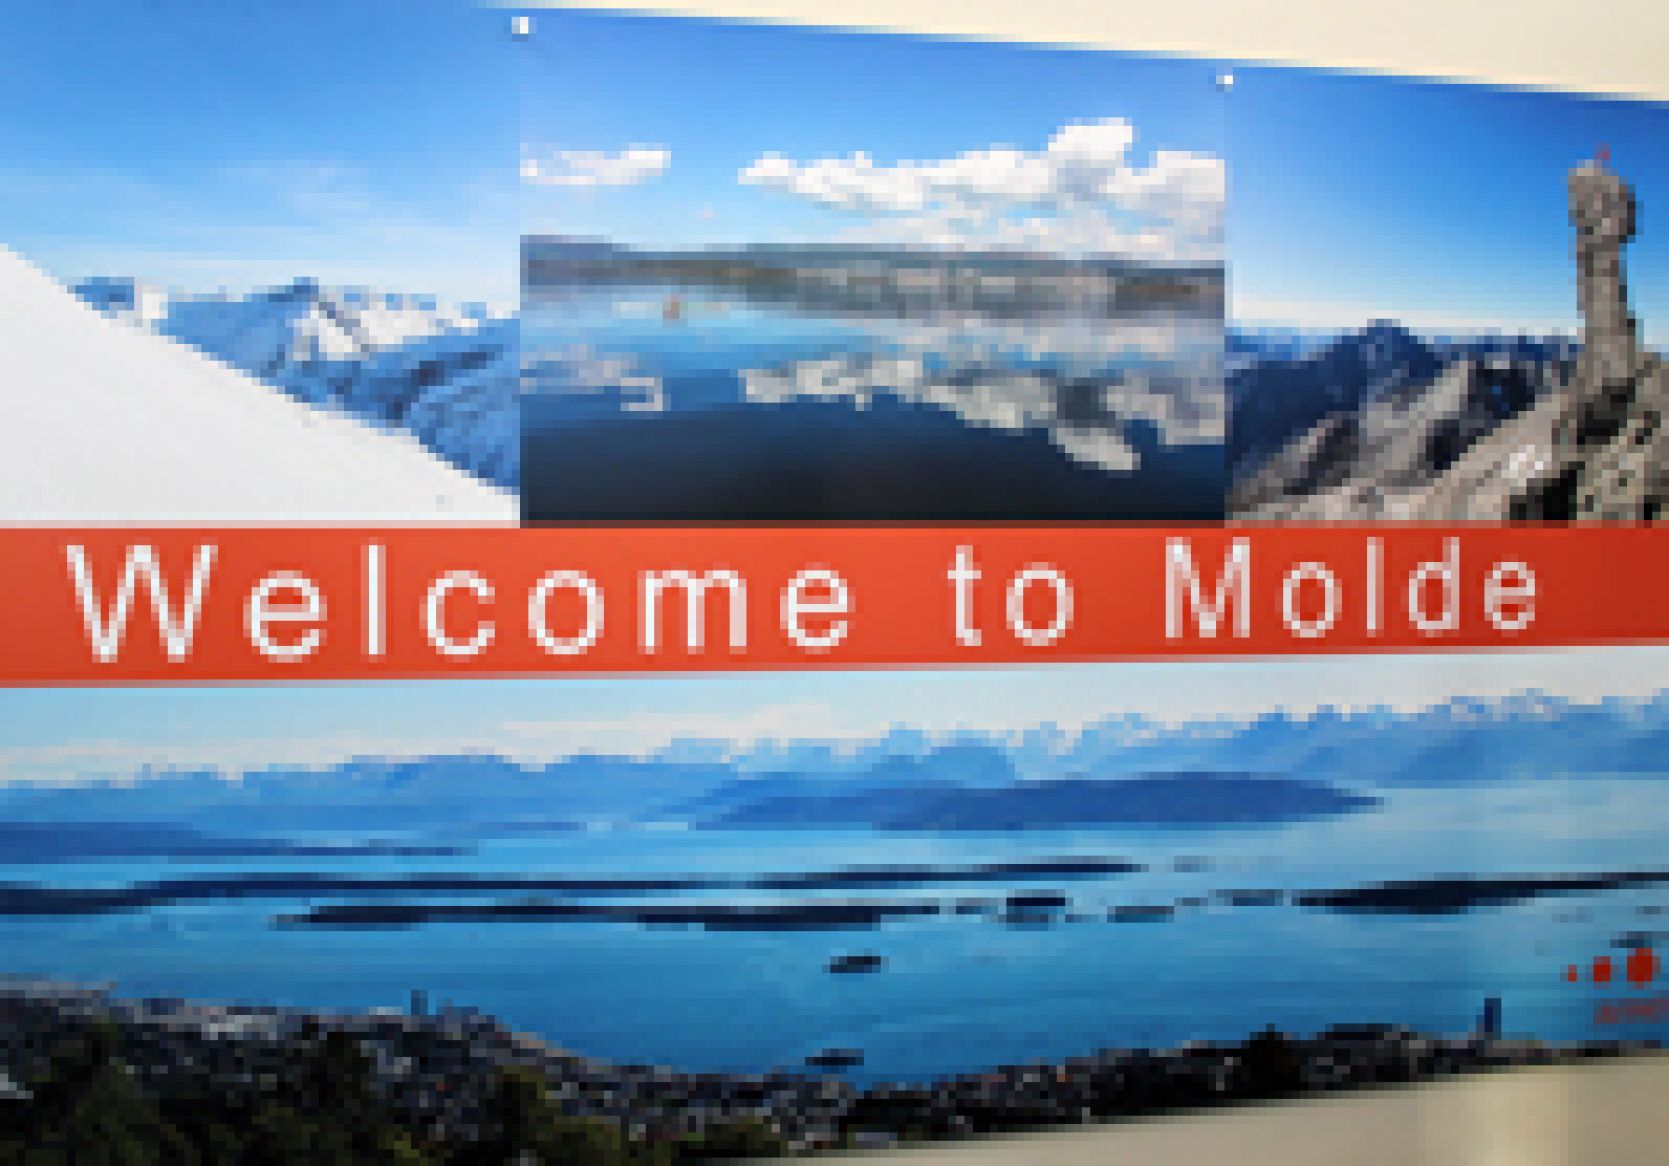 Welcome to Molde